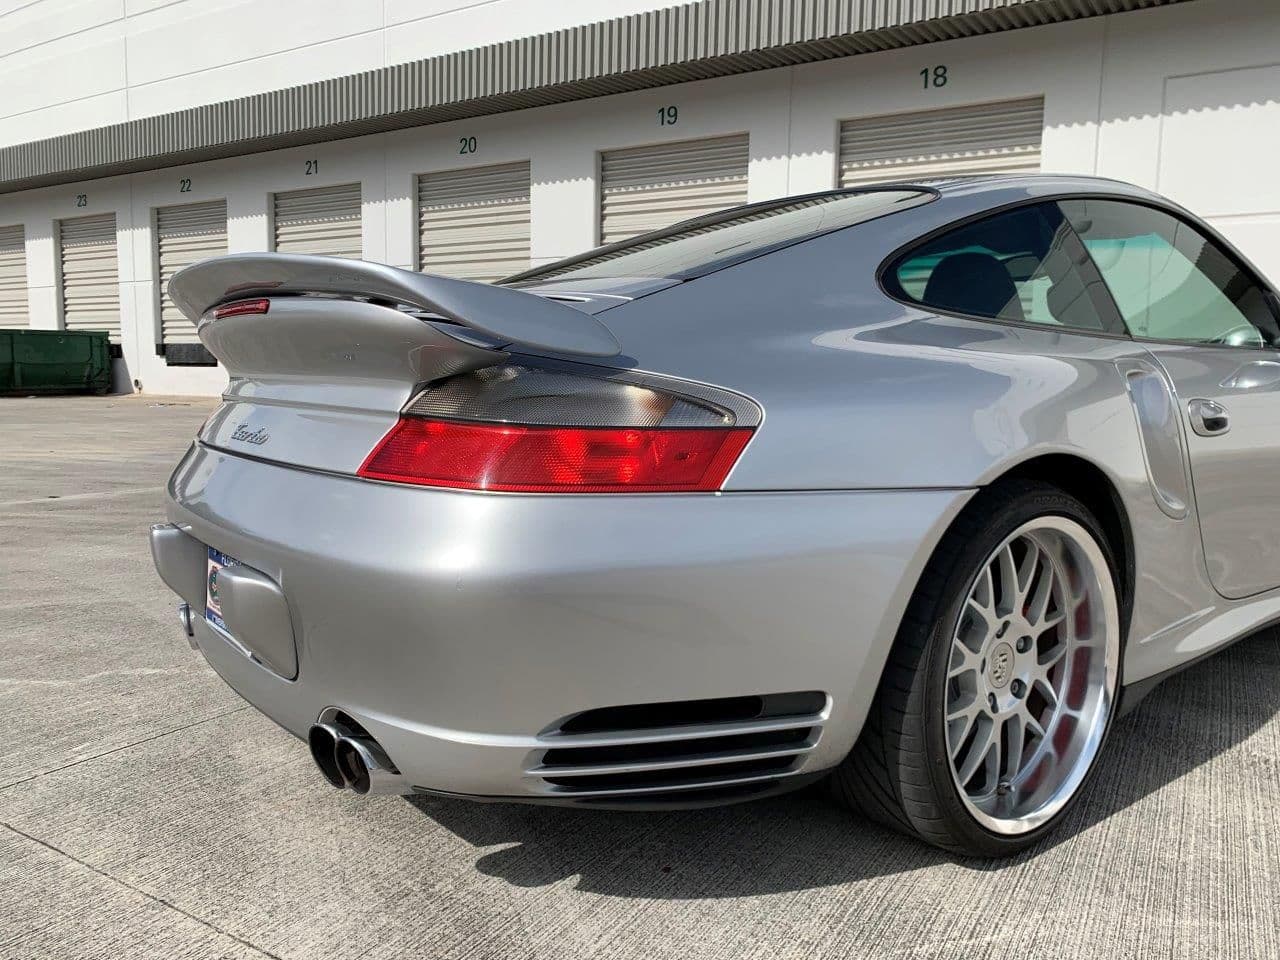 2003 Porsche 911 - Porsche 996 Turbo Coupe - 6 Speed Manual - Used - VIN WP0AB29983S686356 - 56,685 Miles - 6 cyl - AWD - Manual - Coupe - Silver - Plantation, FL 33317, United States